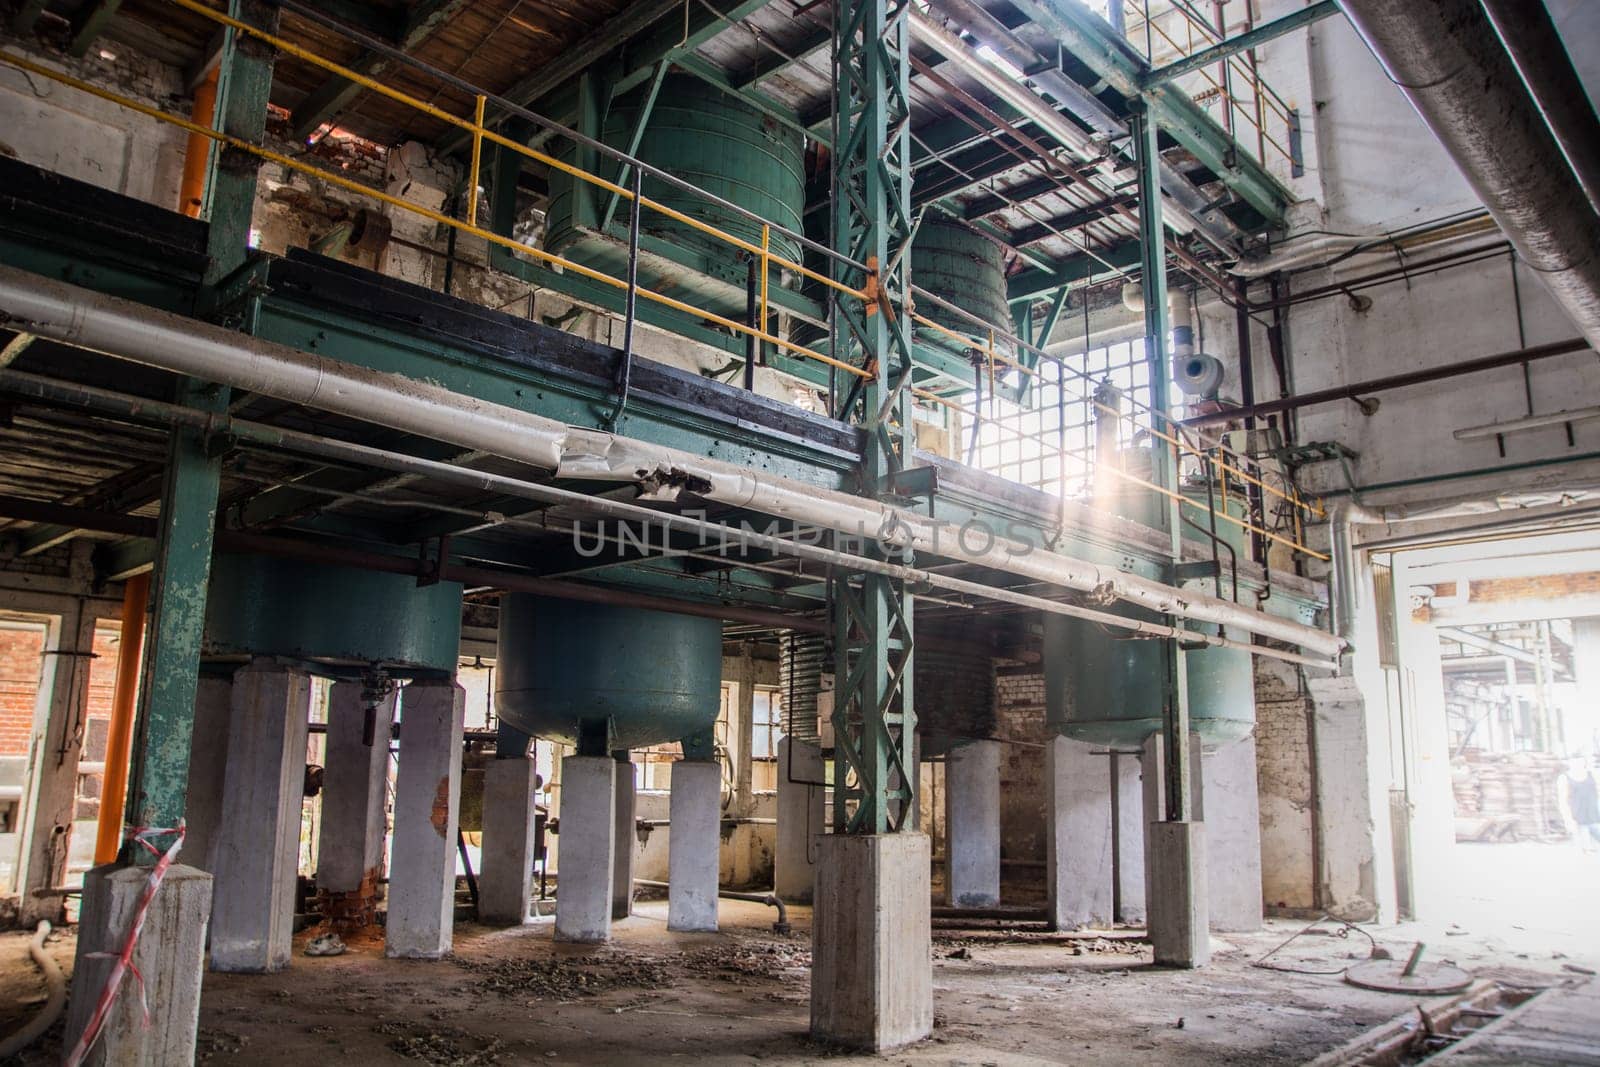 A large industrial building with a lot of pipes